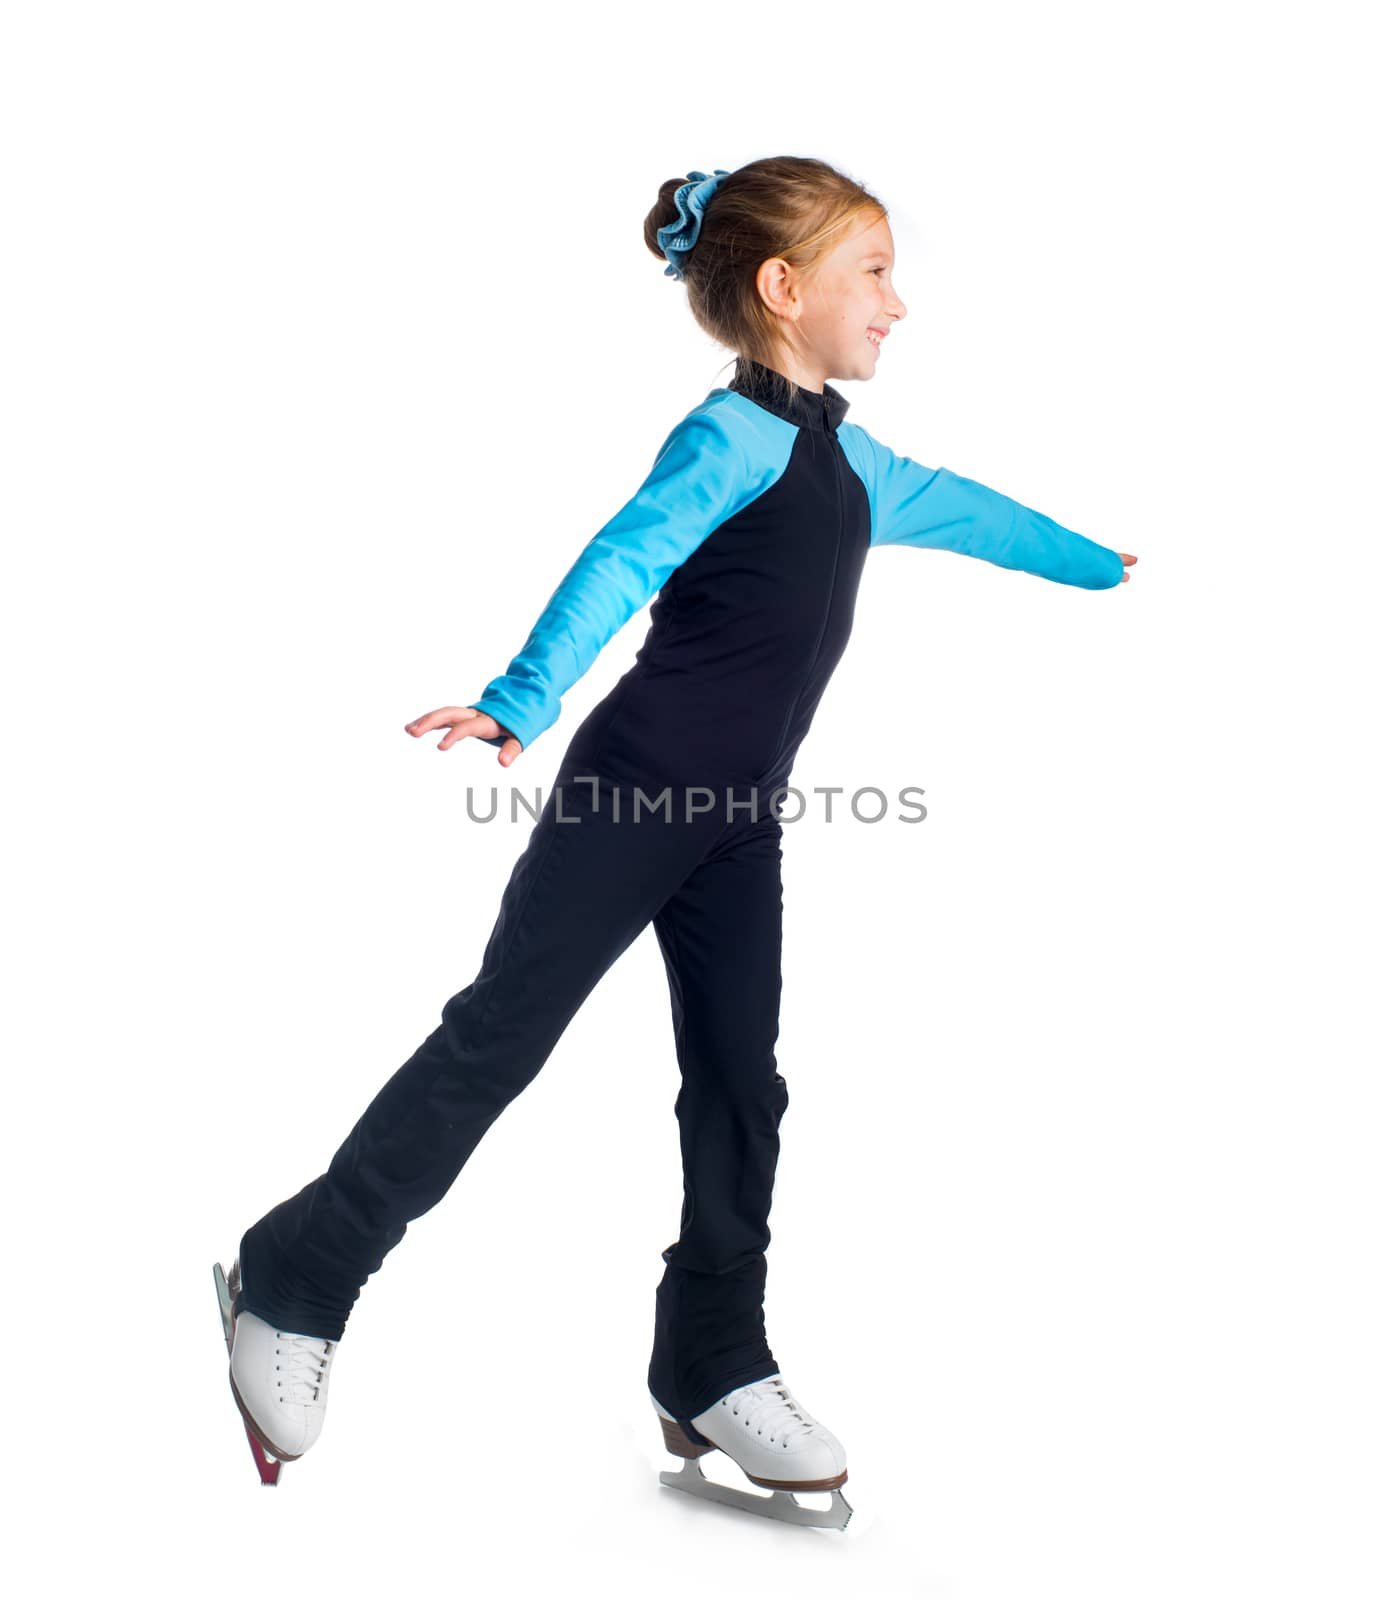 Little girl on skates isolated on a white background